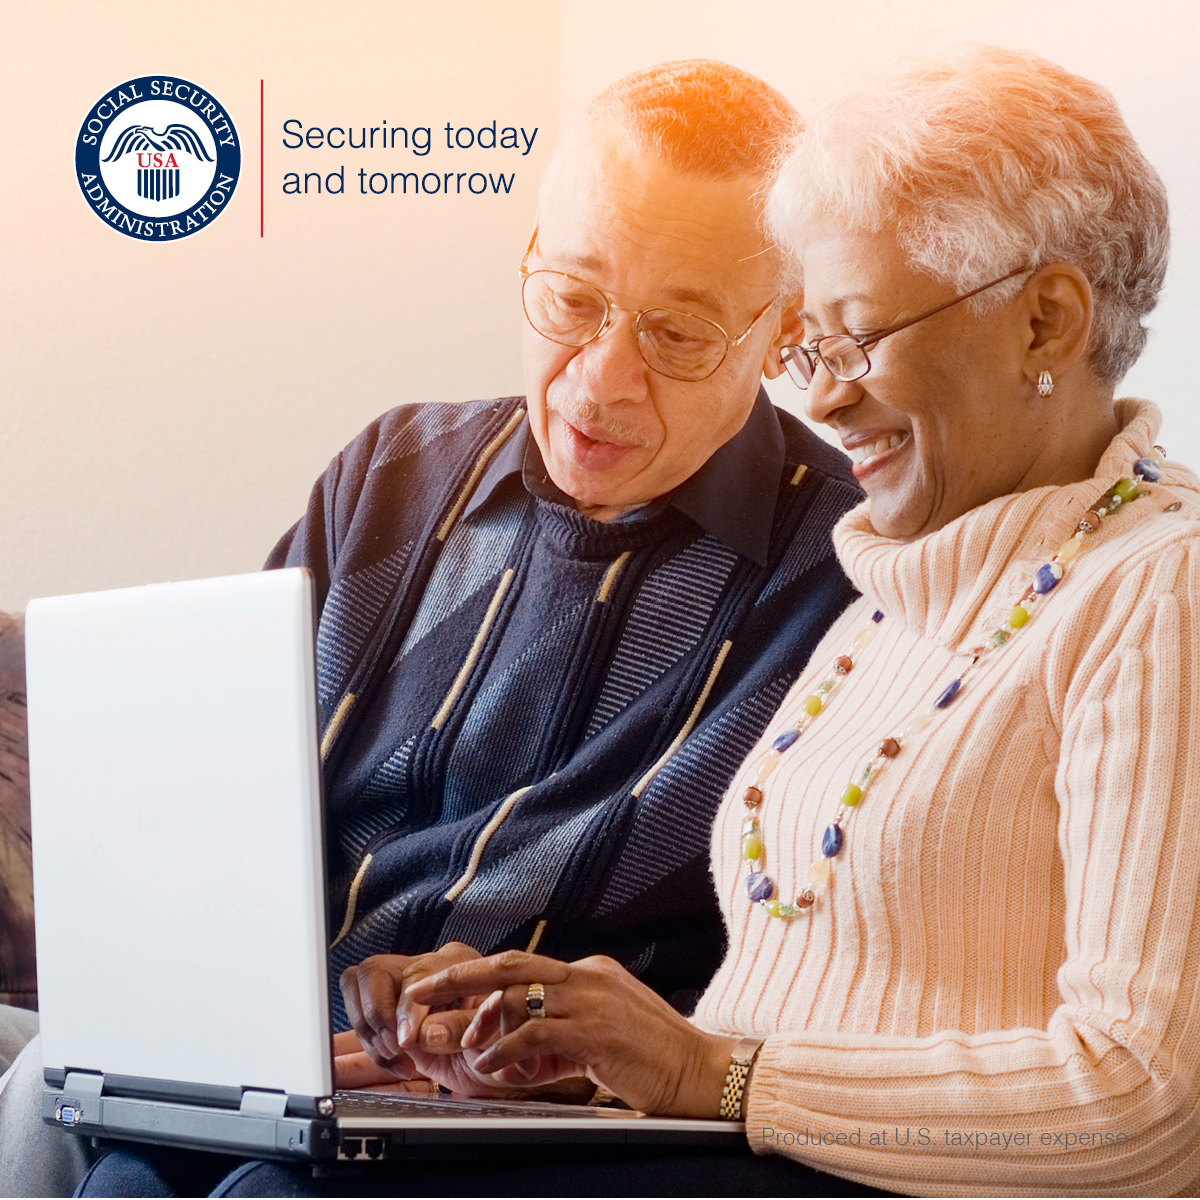 If you are eligible for #SSI, you can receive monthly payments that can make a meaningful difference in your life. Go to ow.ly/KIQI50QSc3u to learn if you might be eligible for SSI and how to apply.